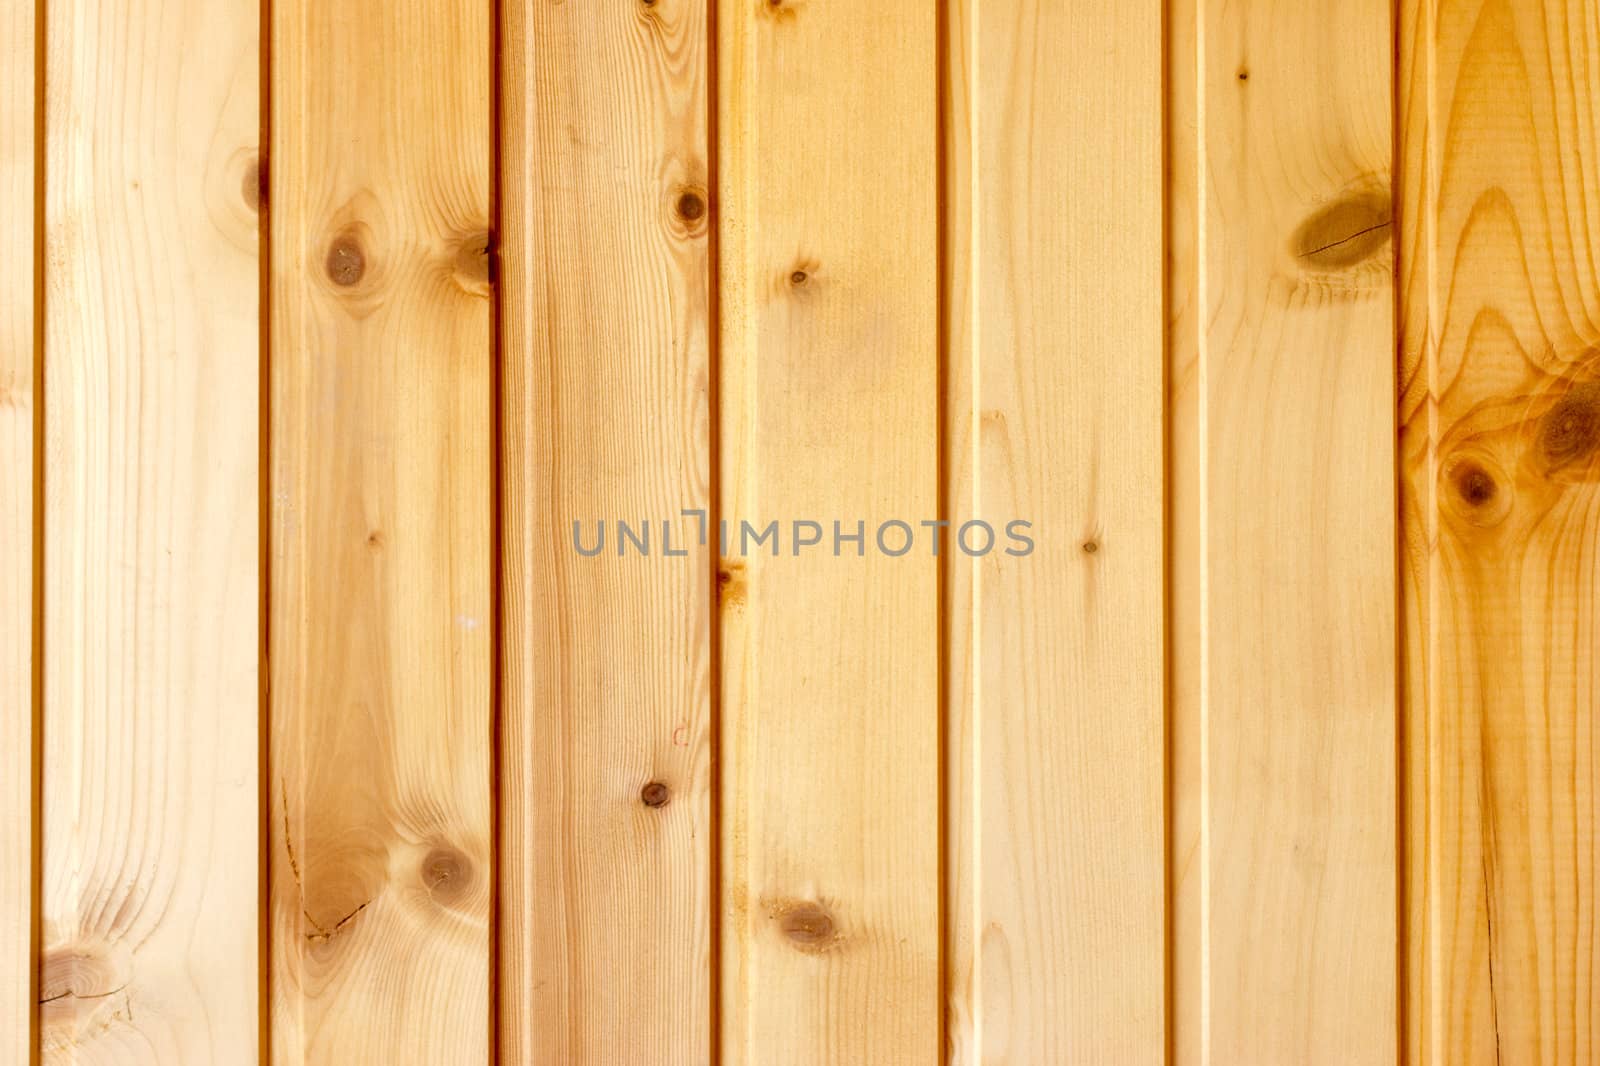 The wall decorated by wooden planks